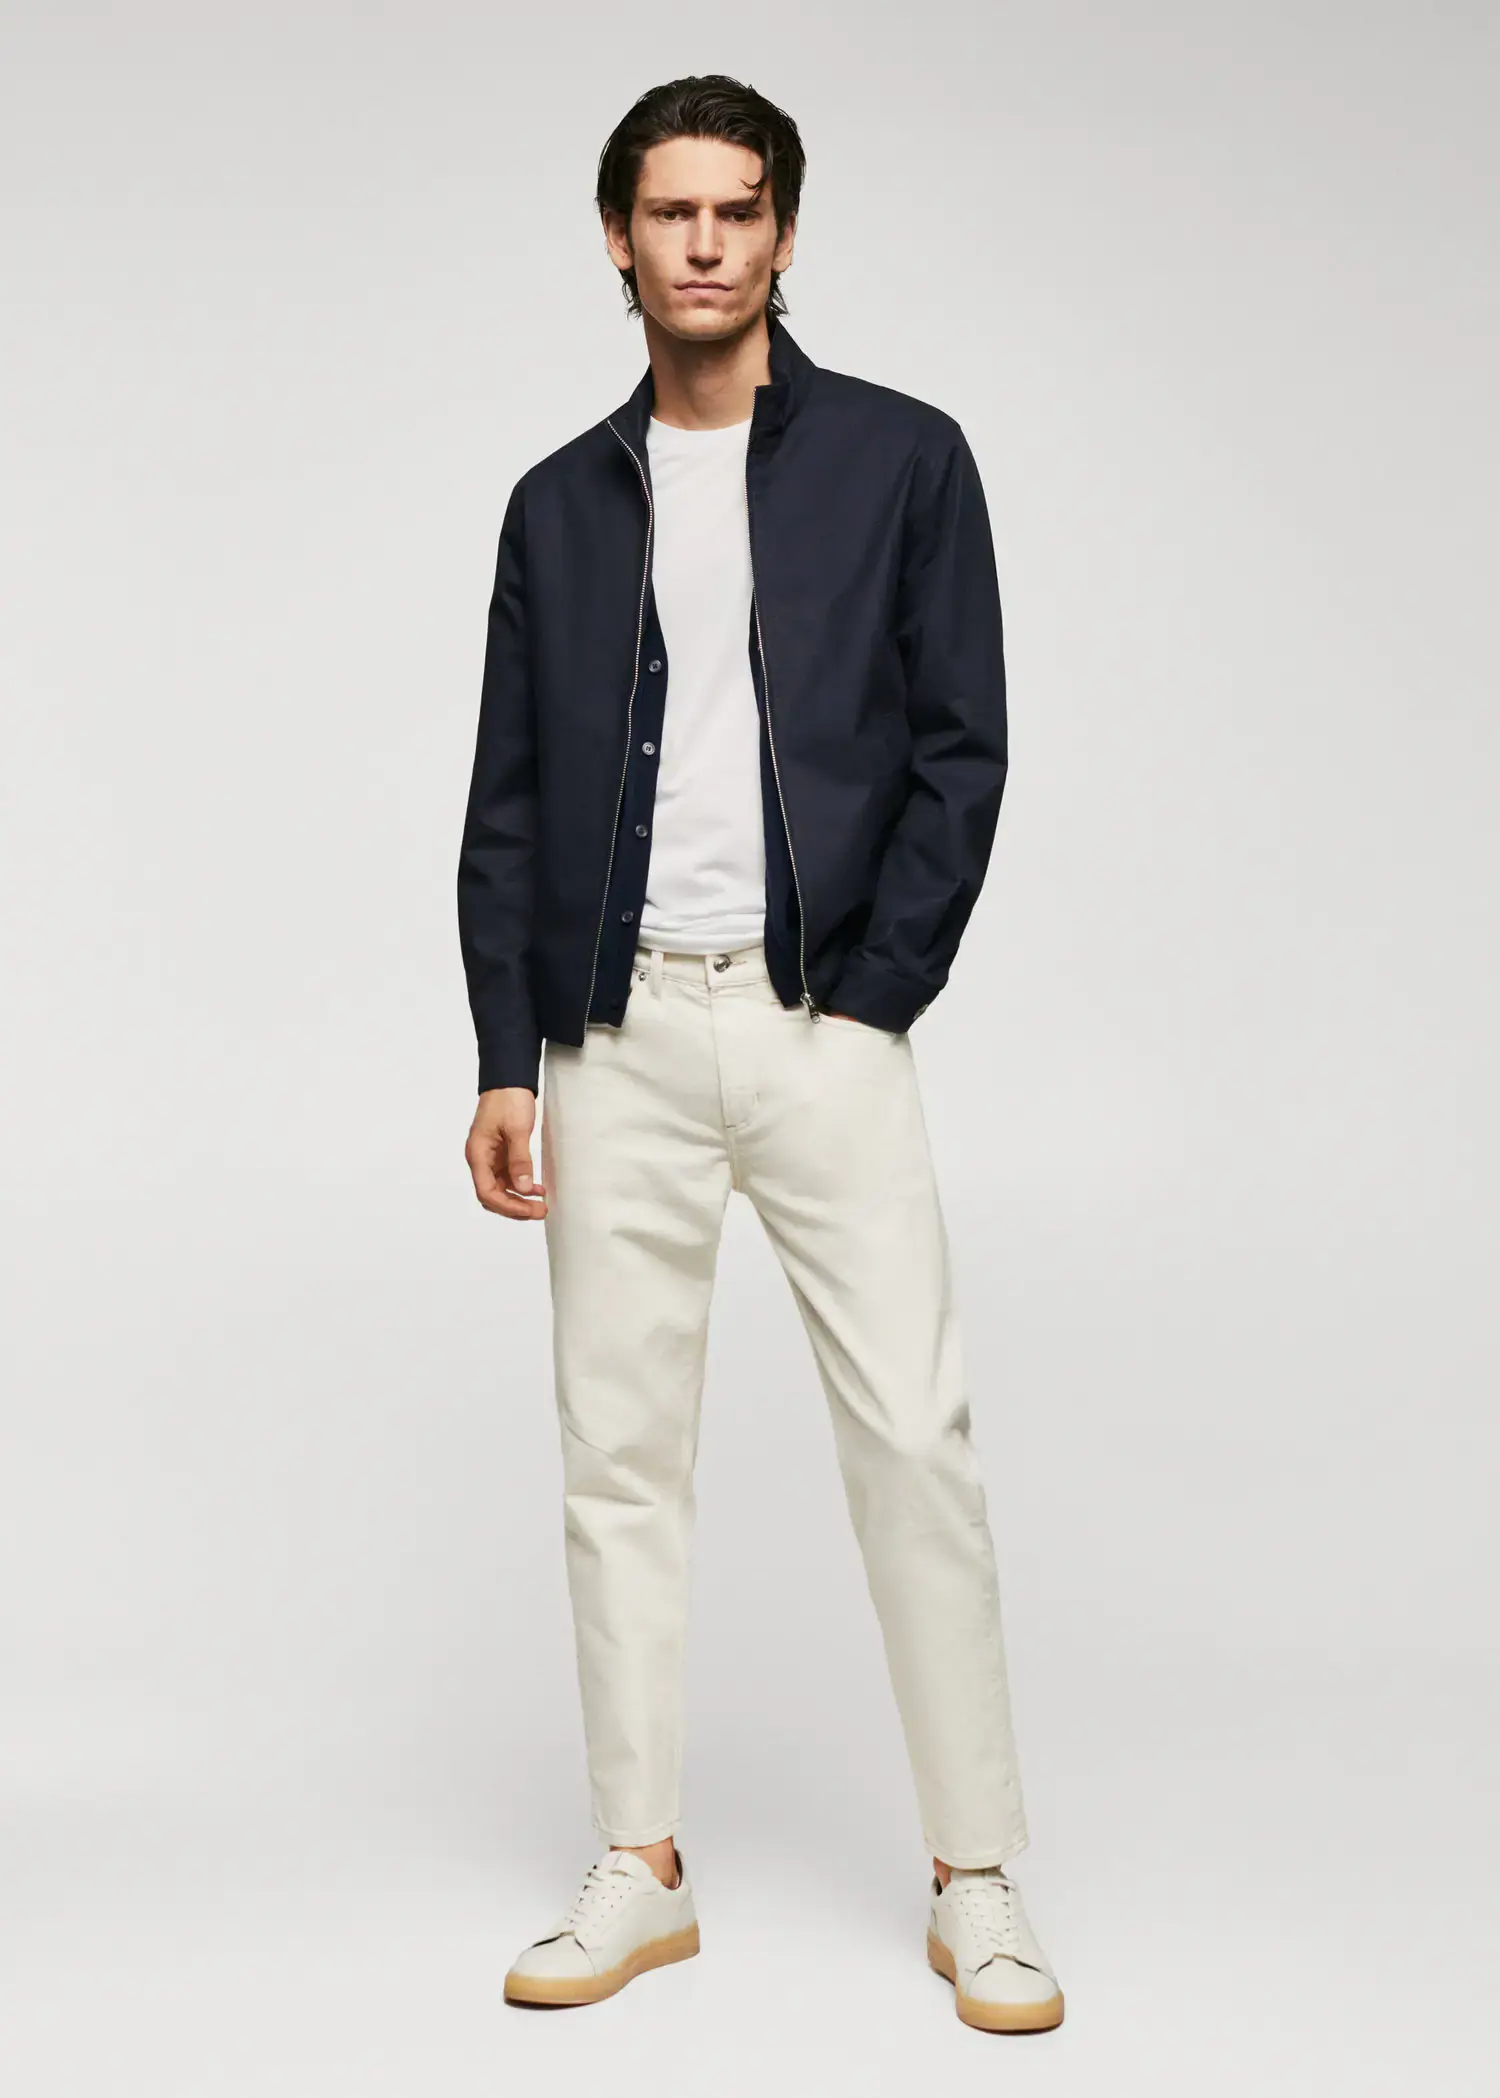 Mango 100% cotton bomber jacket. a man in a white shirt and a jacket. 